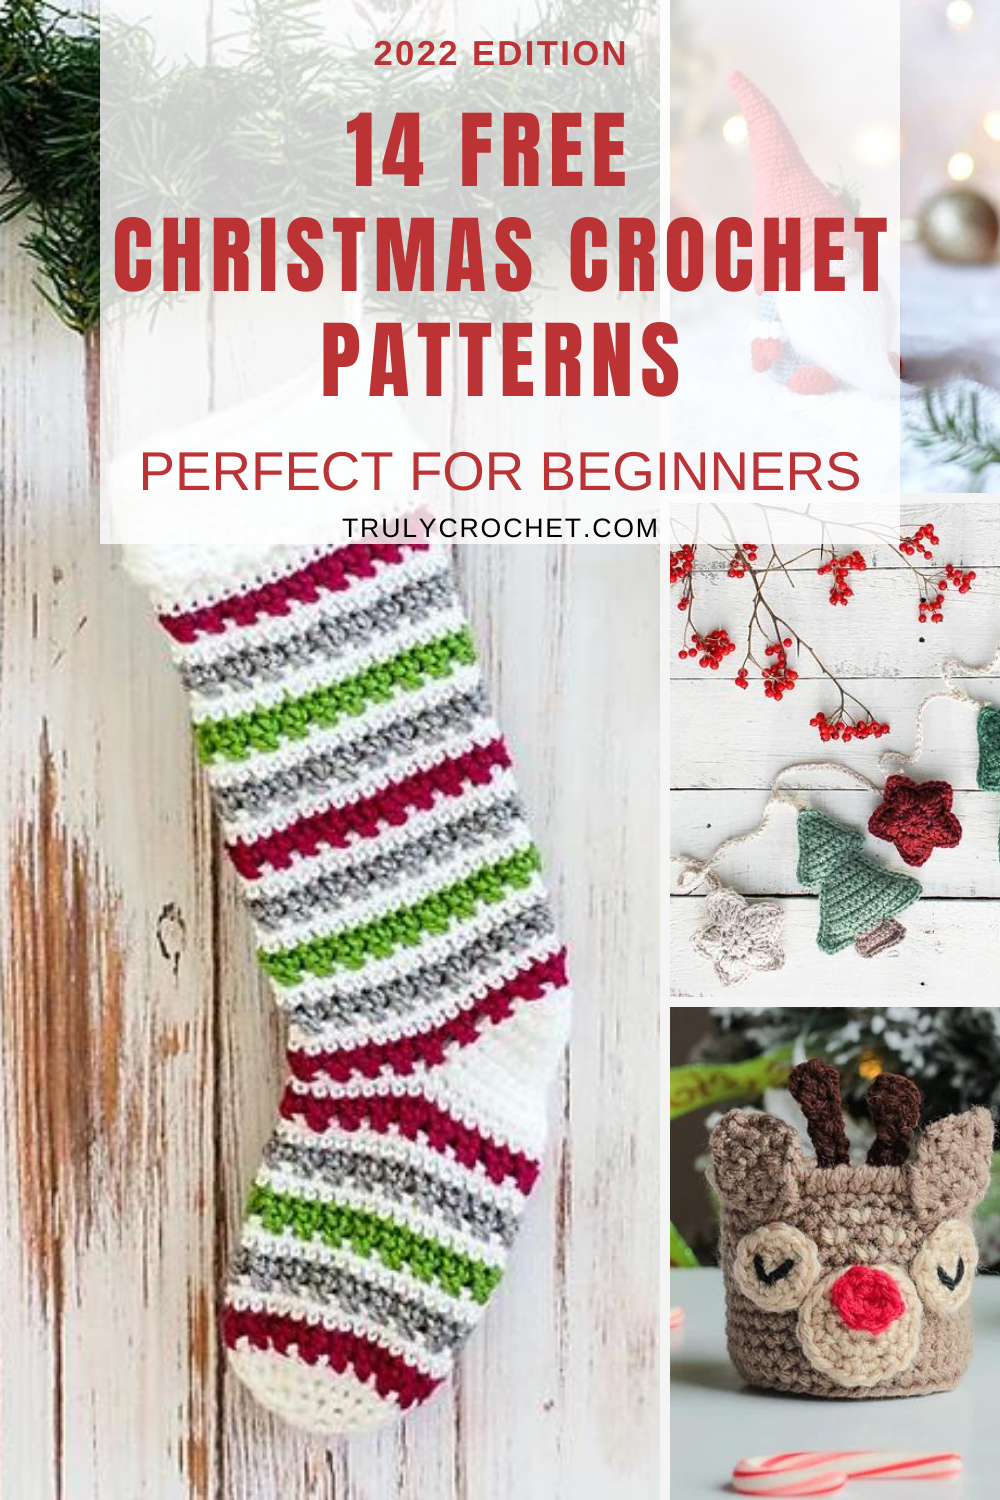 Free Crochet Patterns for Christmas